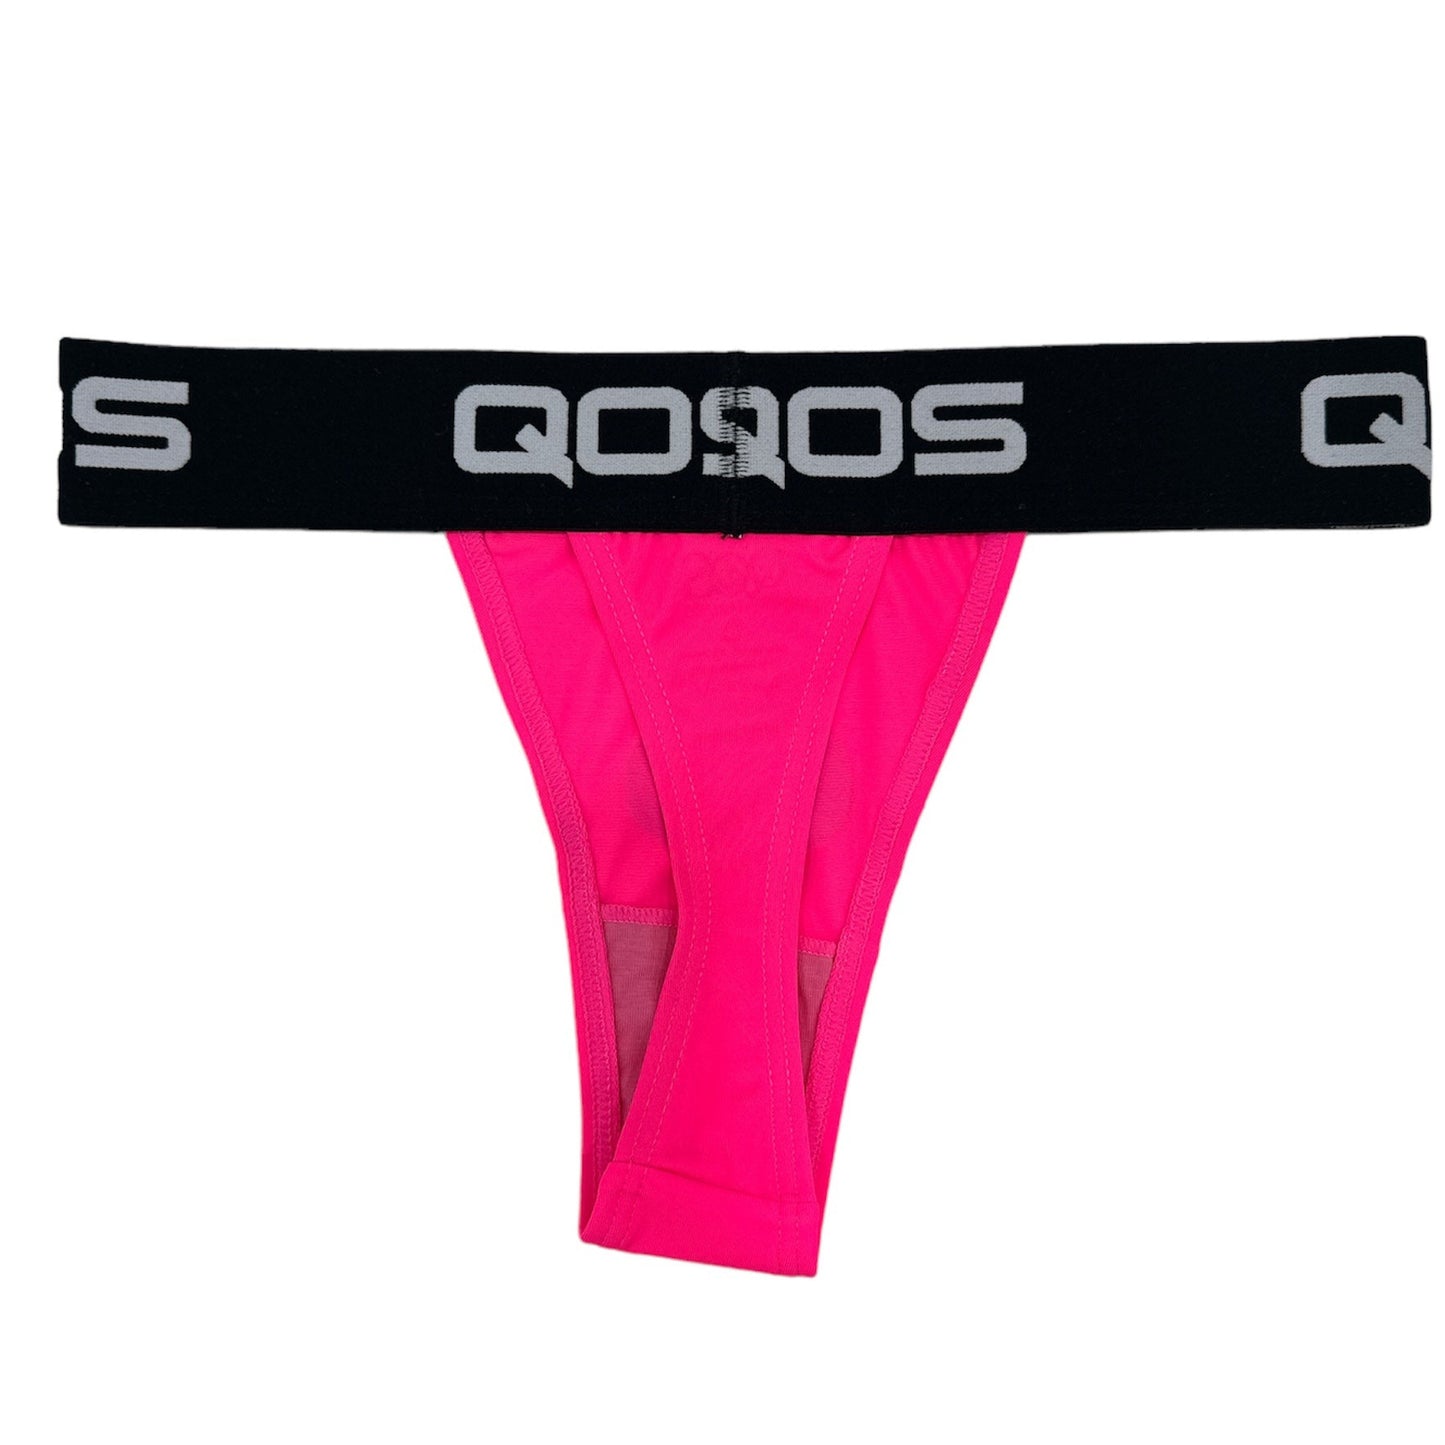 Hot Pink Iconic QOS Brand- Queen Of Spades - Thong